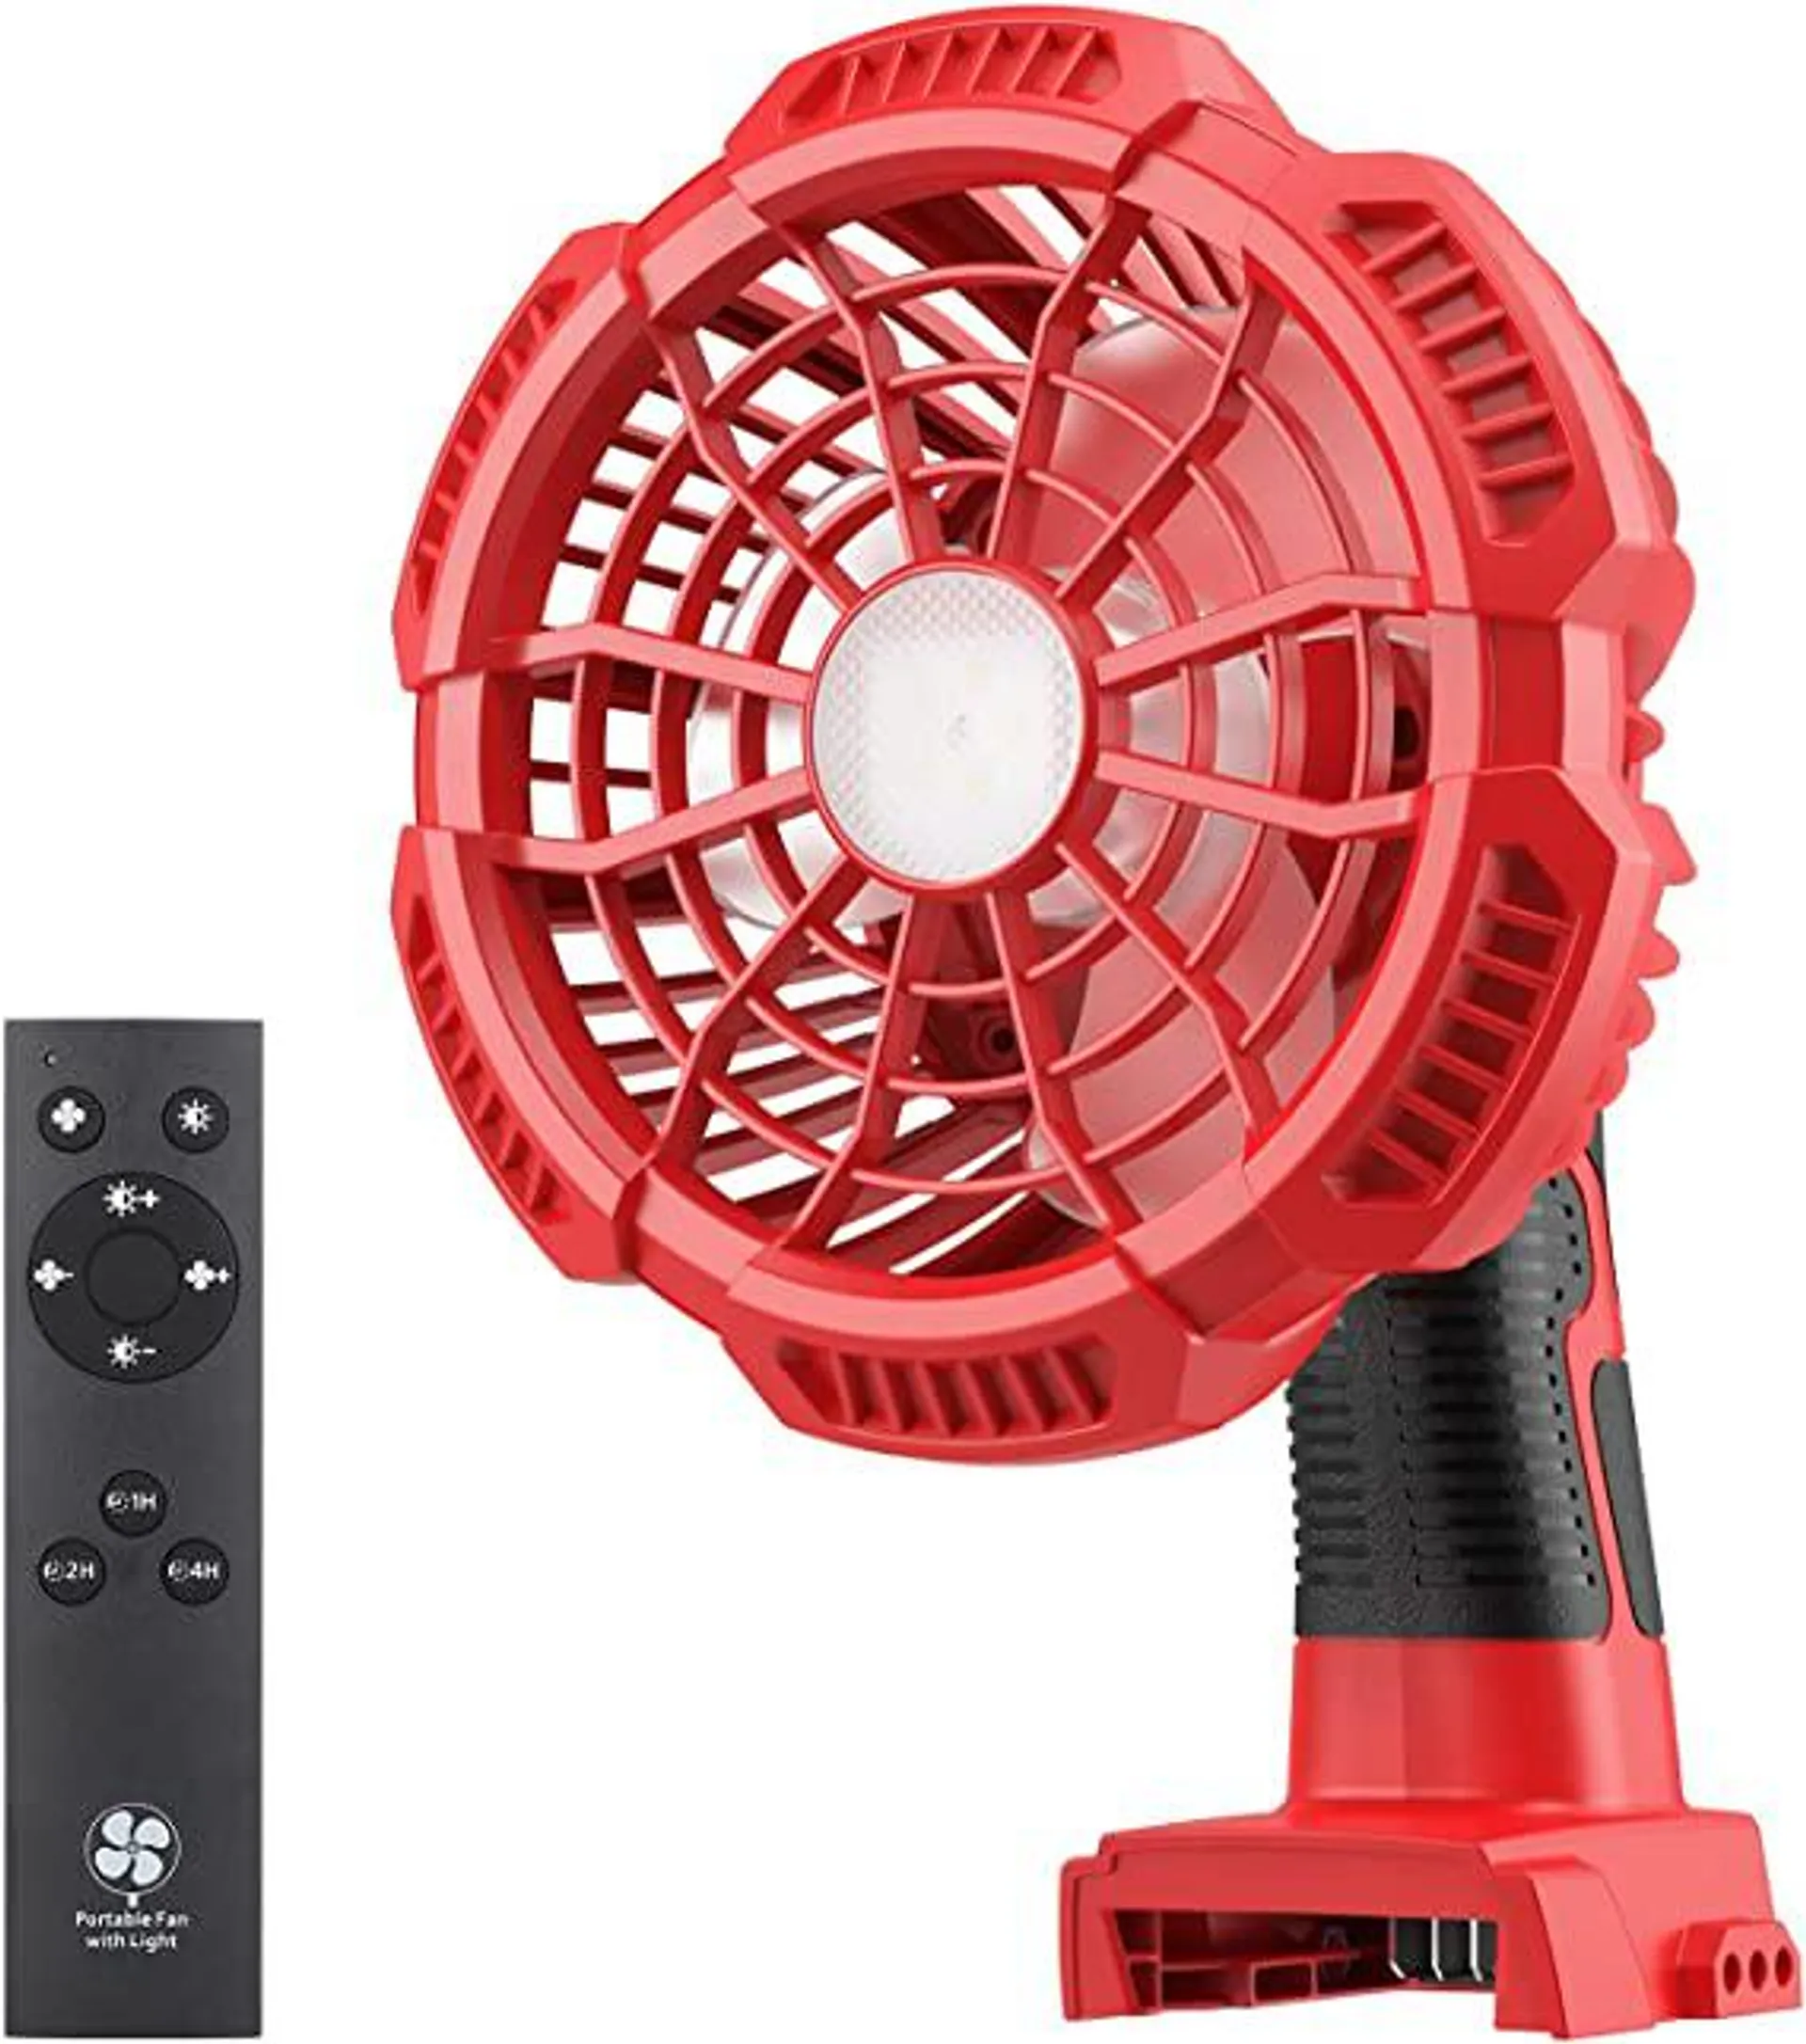 Hipoke Cordless Portable Fan Powered by Milwaukee M18 18V Lithium-ion Battery, Handheld Fan with 9W LED Light, USB Port, Rechargeable fan for Camping Tent Office Travel, Milwaukee Tools Summer Gift